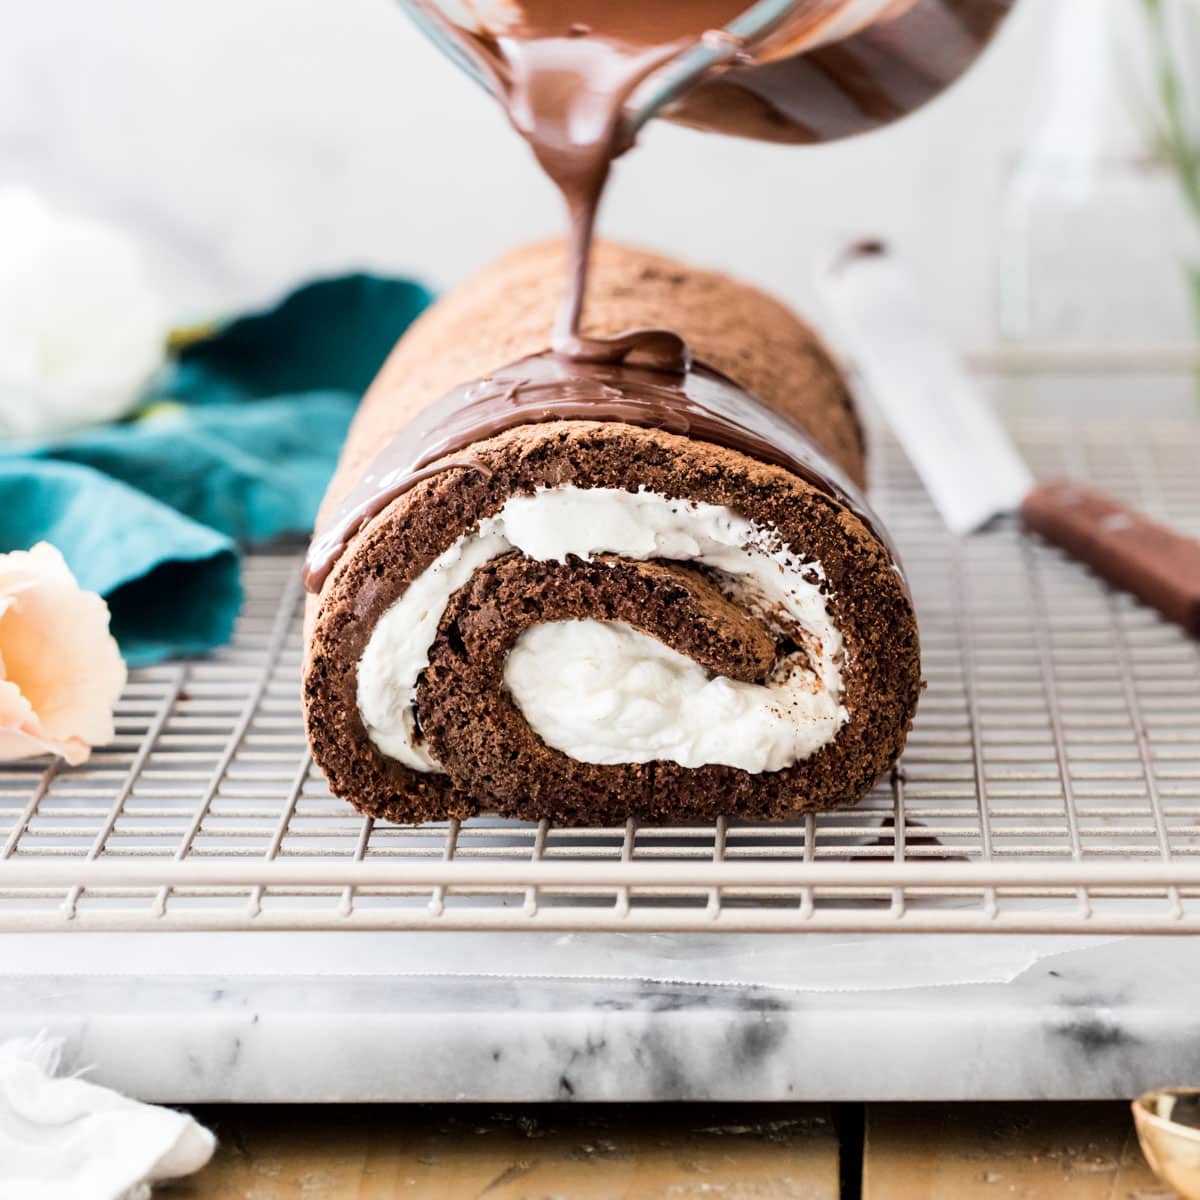 How to Make a Cake Roll in 5 Steps for an Impressive Dessert